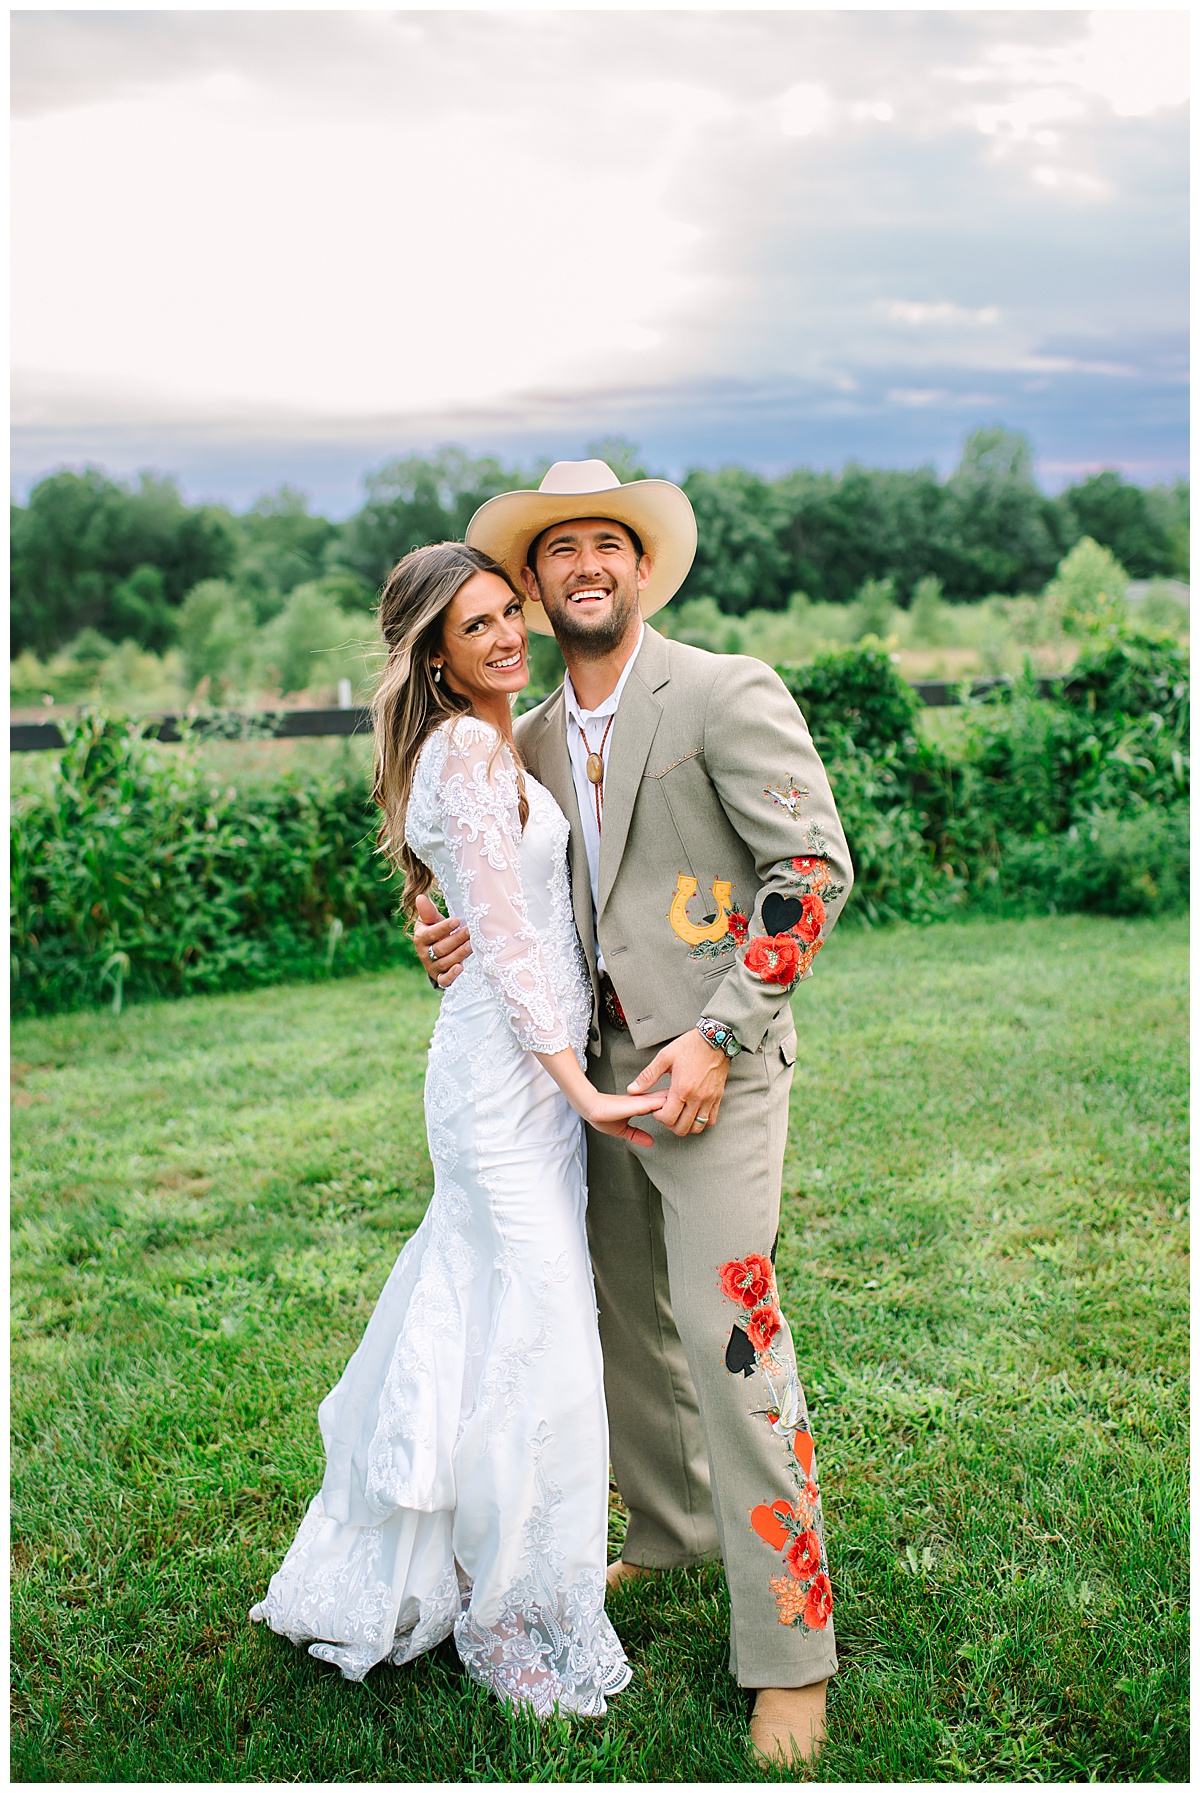 Bride and groom smile together for Brittany Emerson Photography